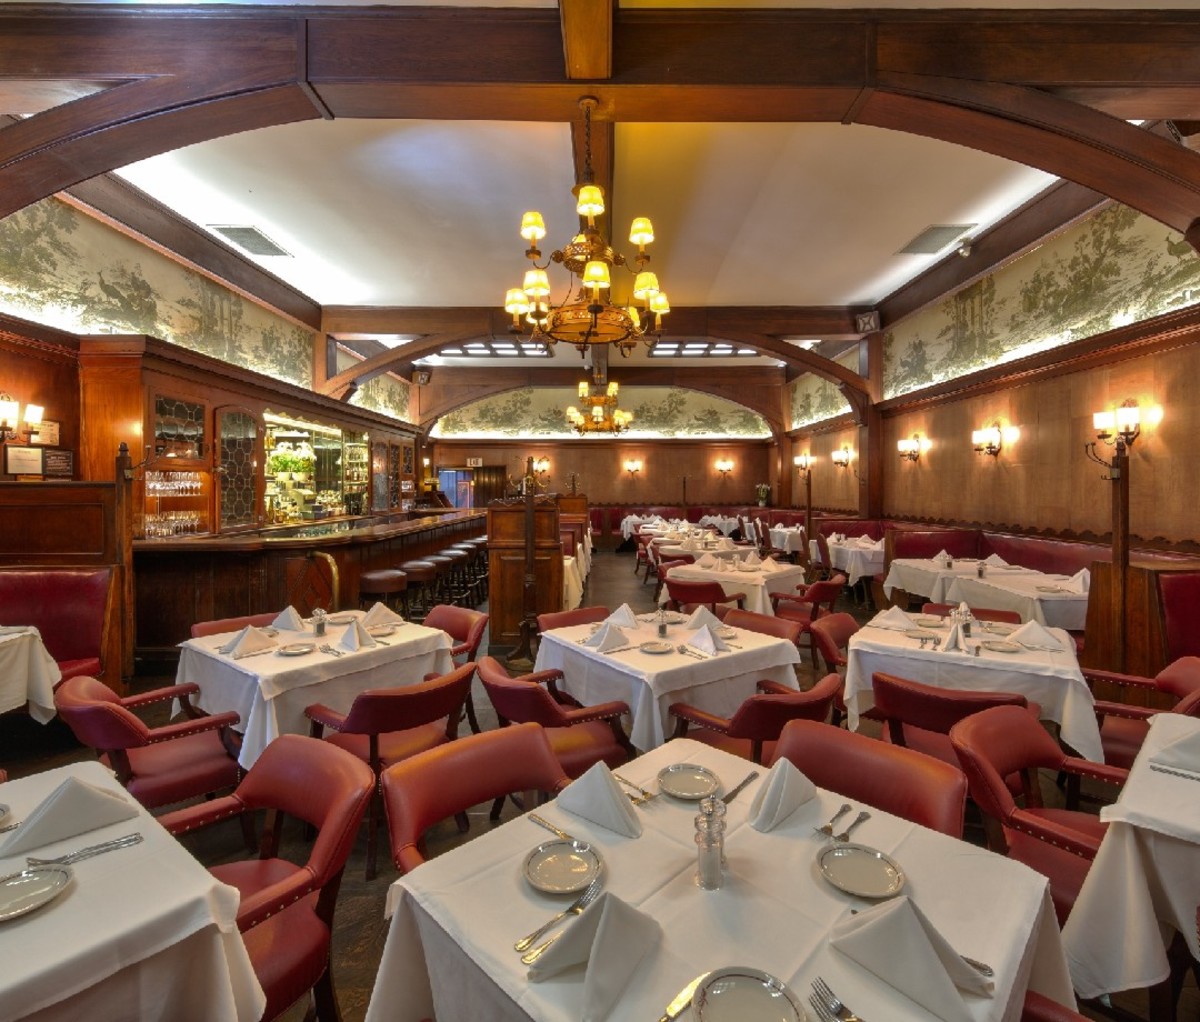 Interior of fine-dining restaurant with white table cloths